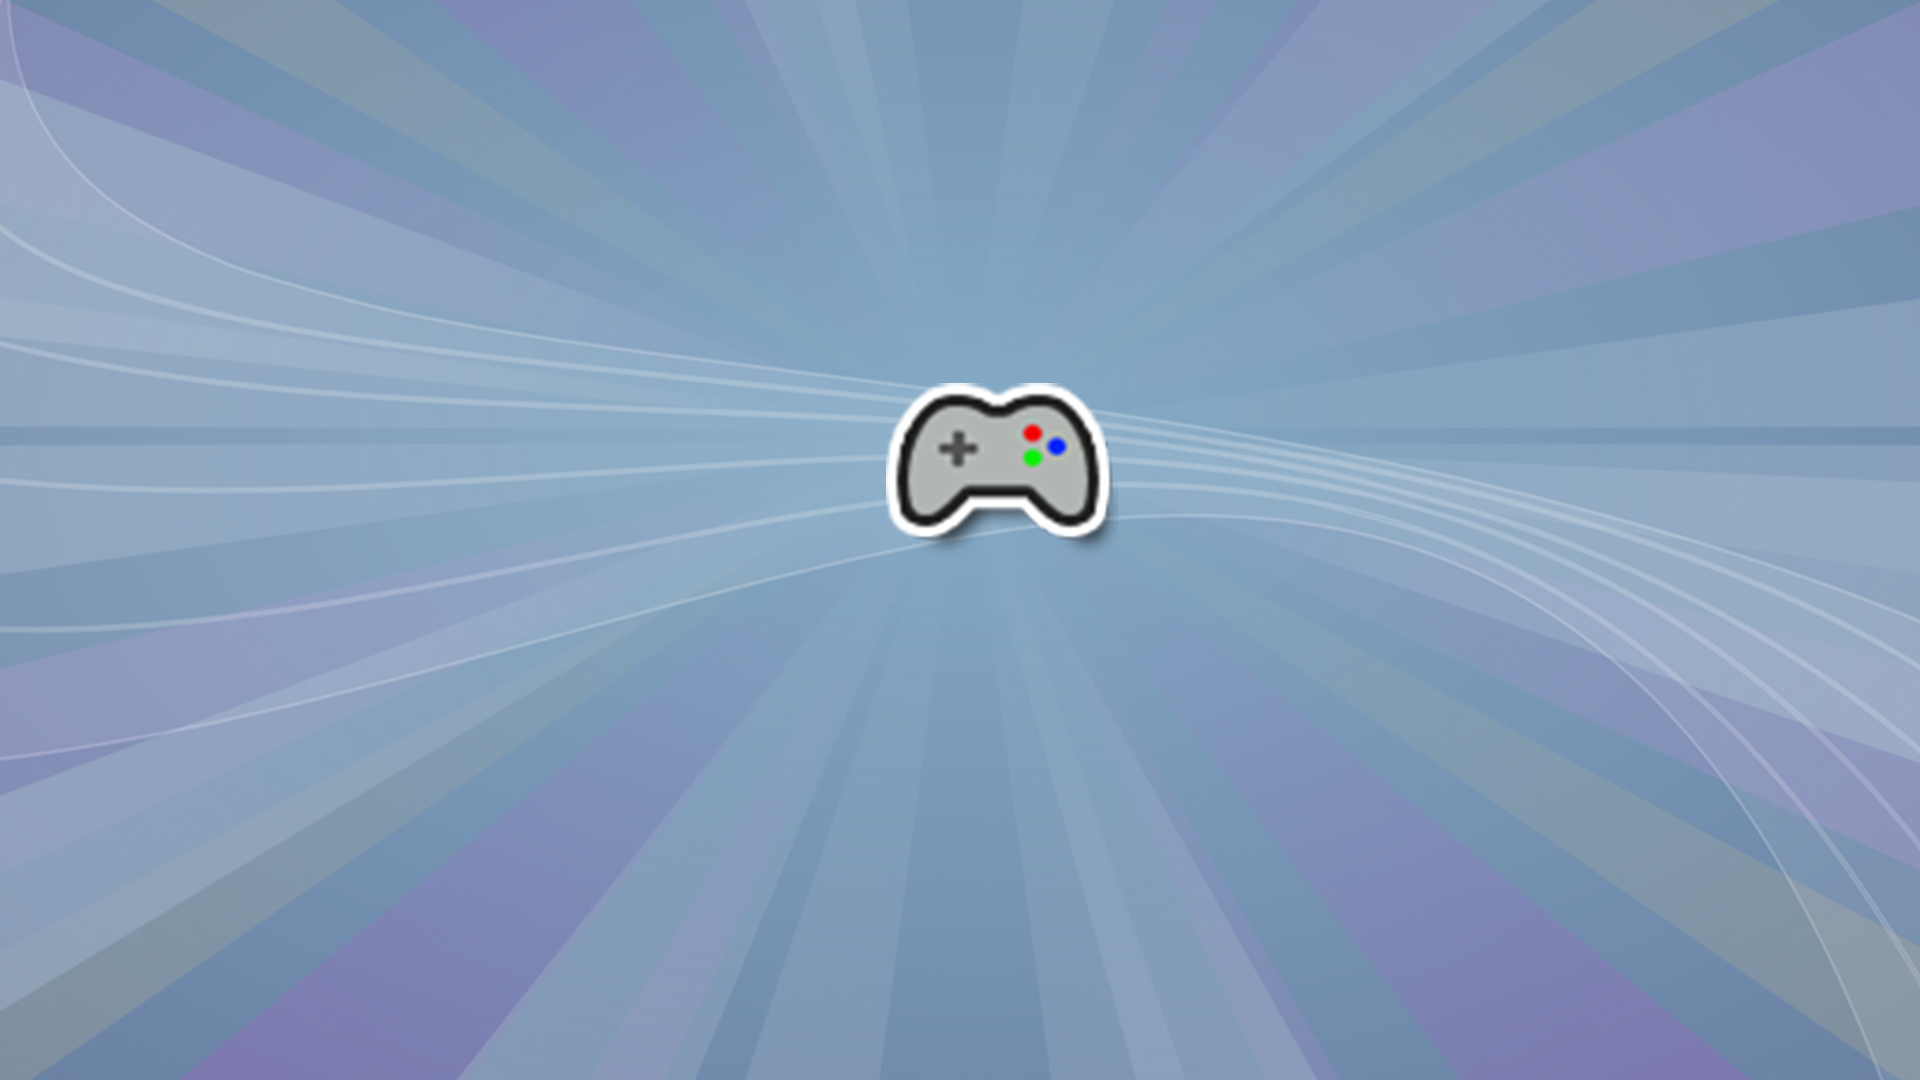 Icon for Joystick, keyboard, mouse